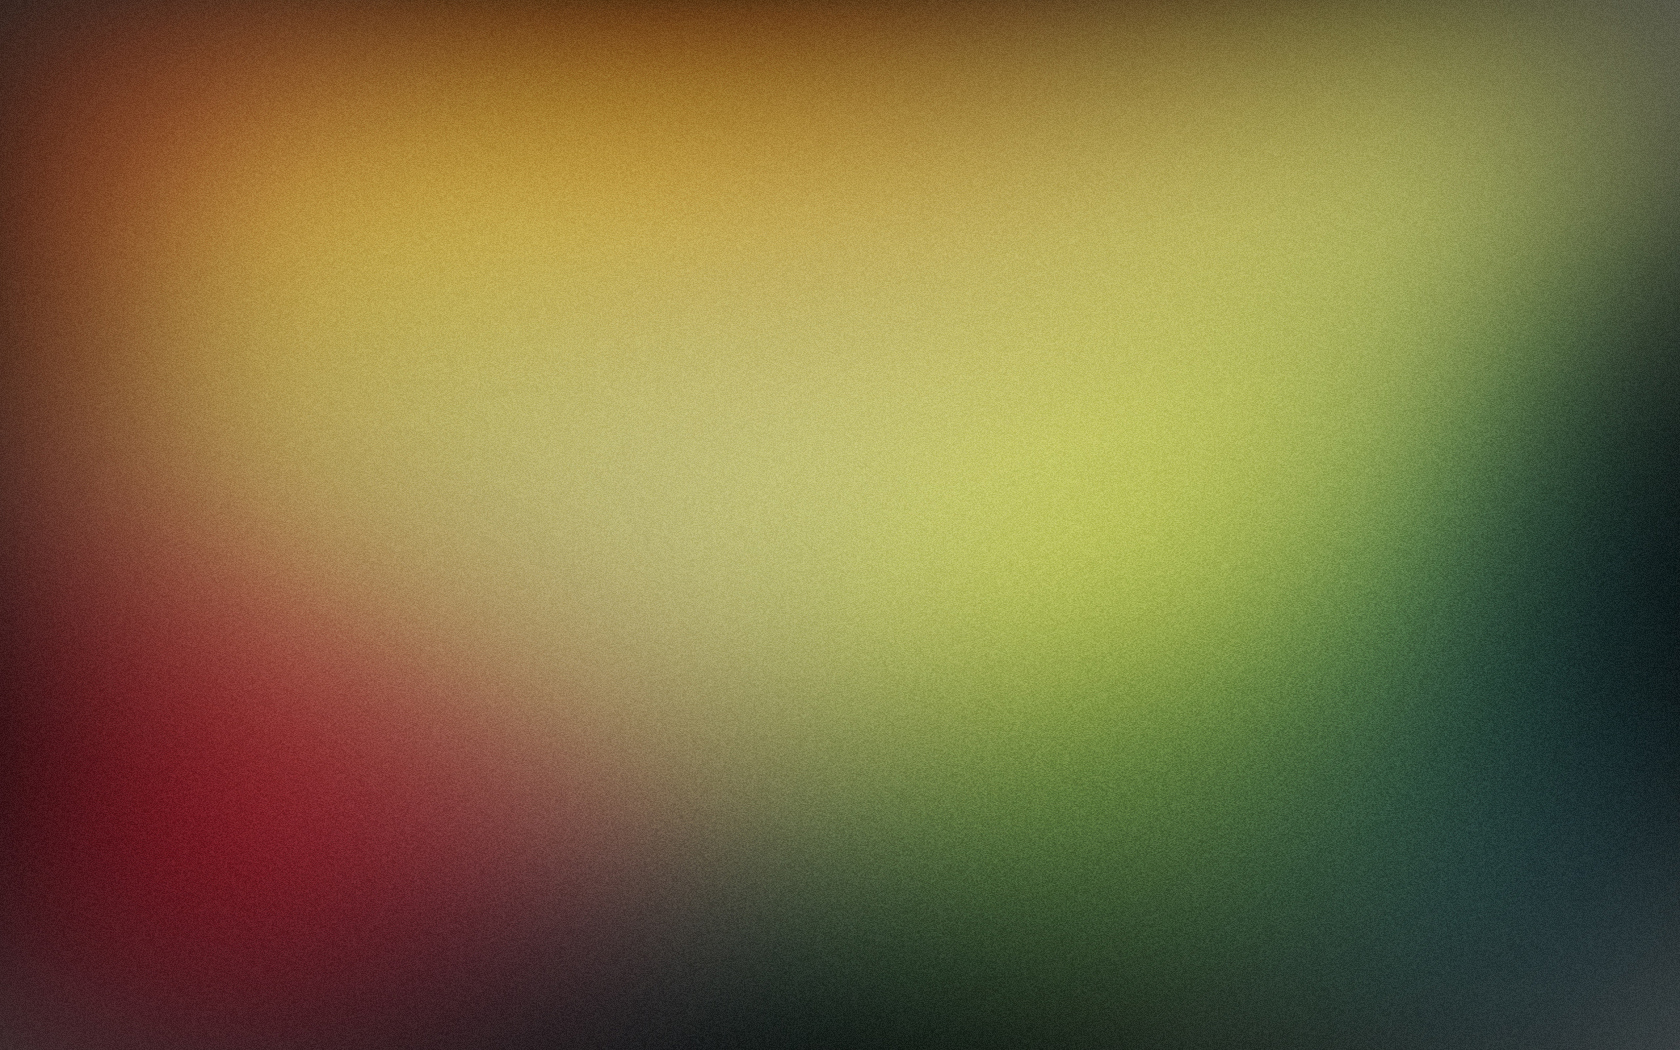 blurred textures simple wallpapers 